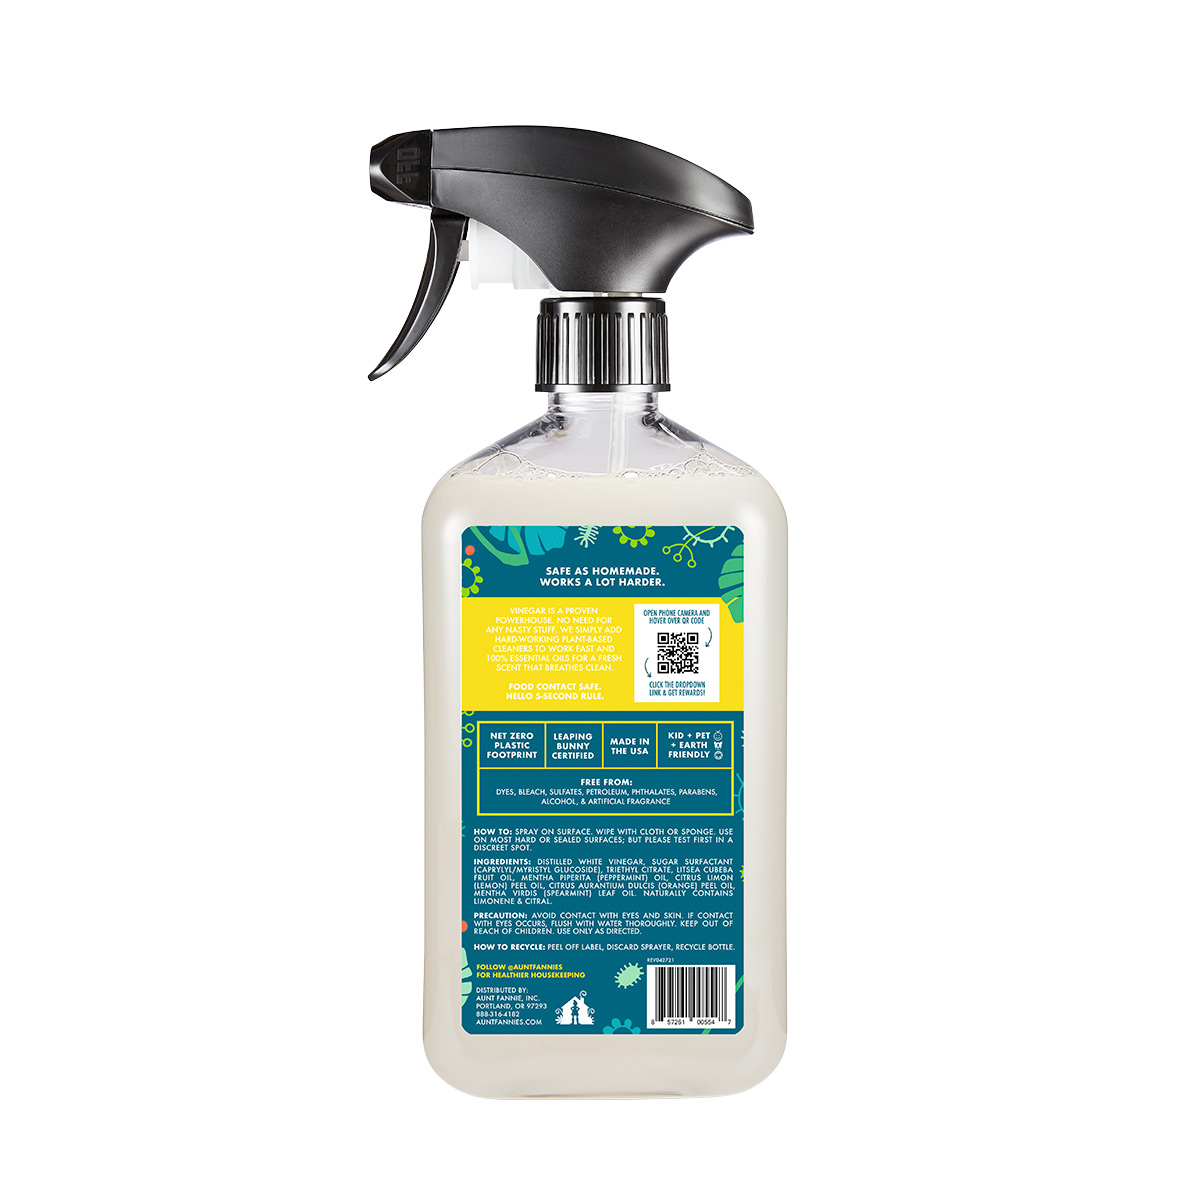 https://www.containerstore.com/catalogimages/458498/10090662-aunt-fannies-16.9oz-cleanin.jpg